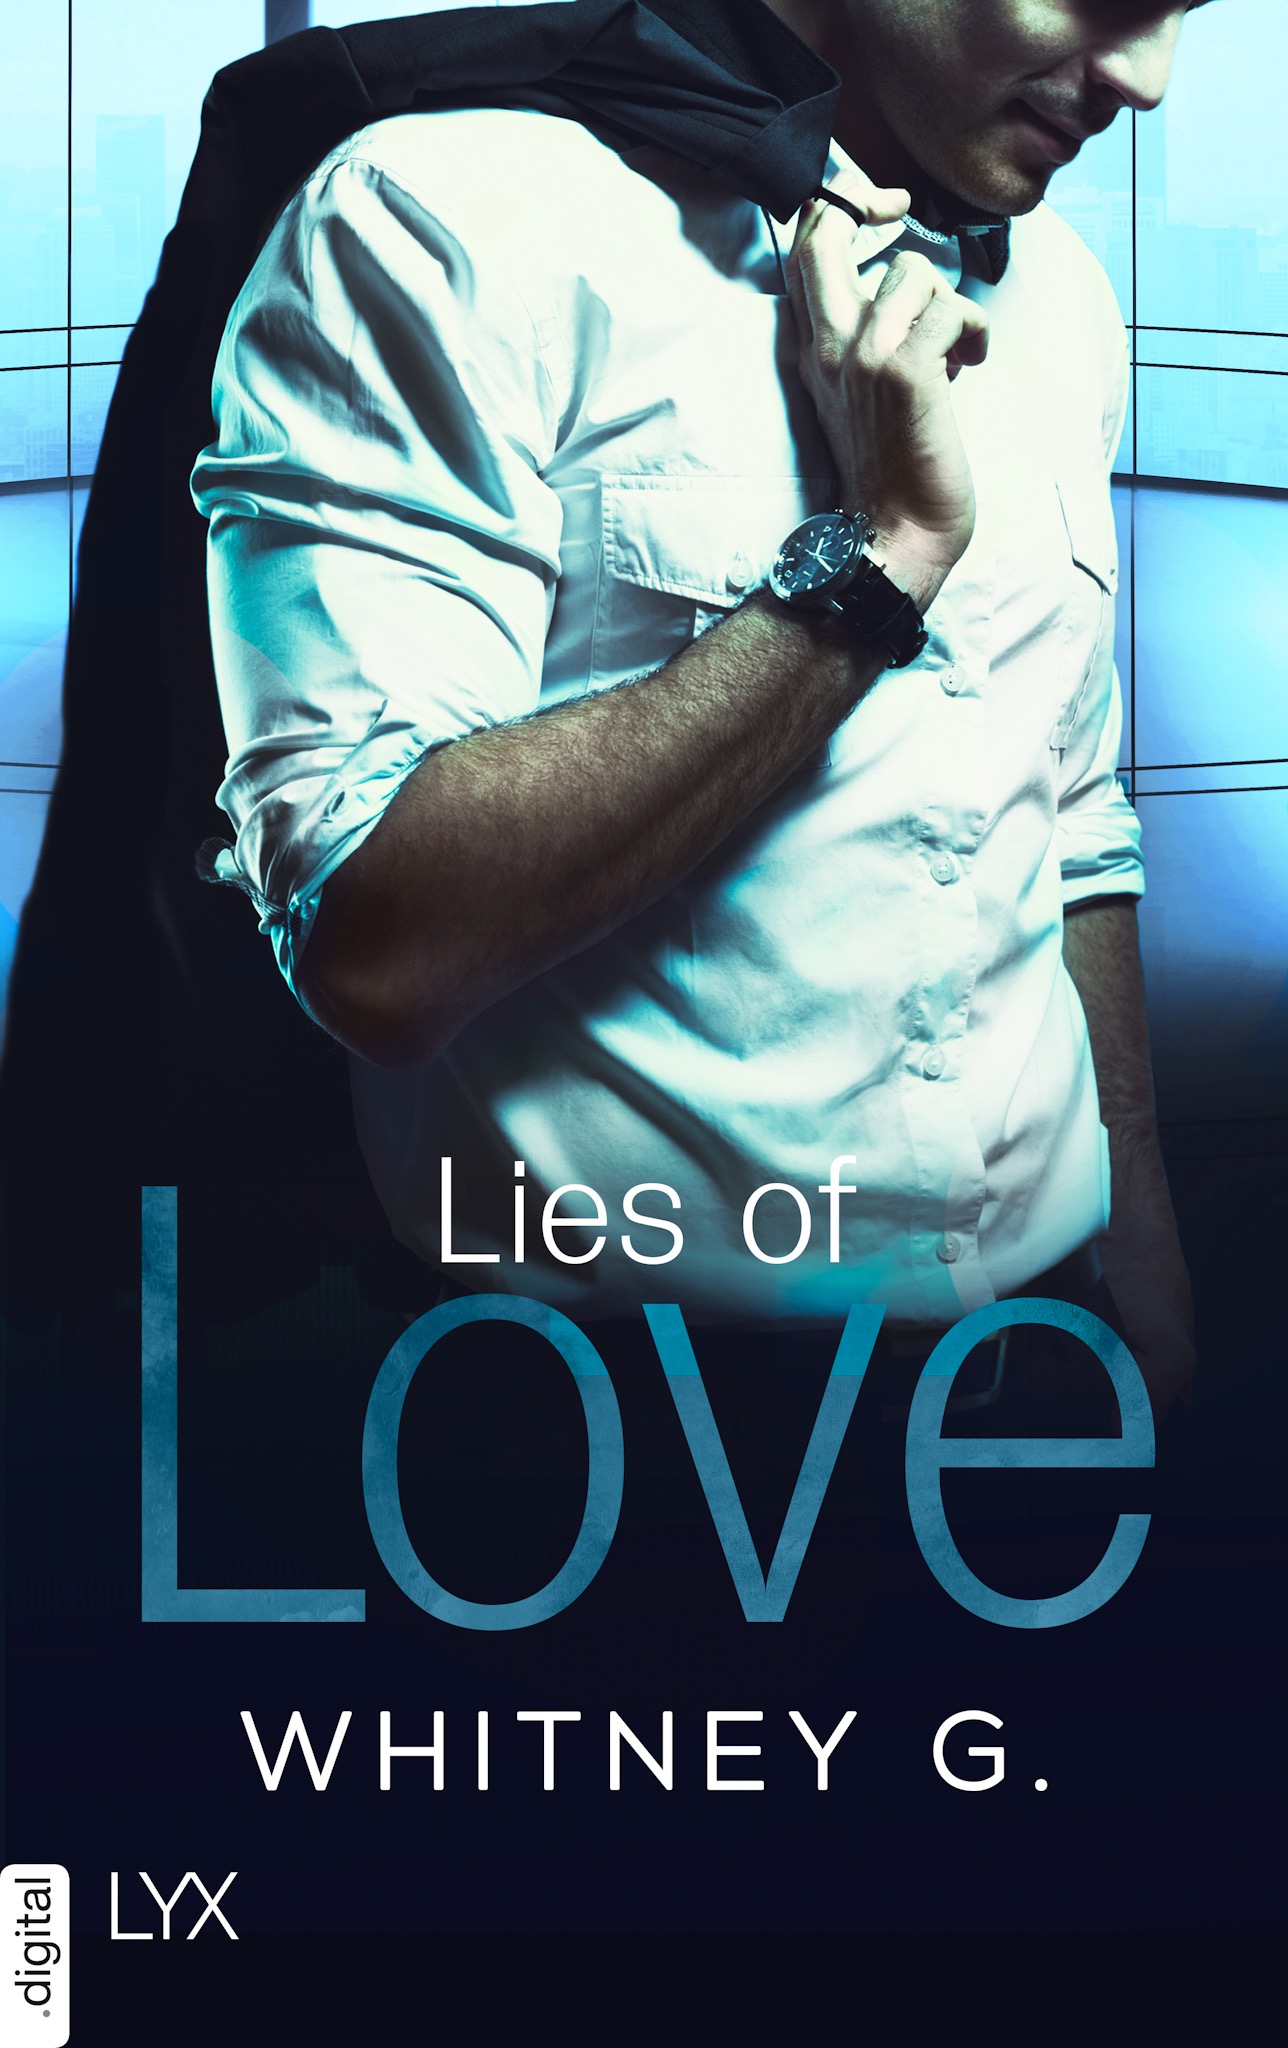 Cover: Lies of Love (Whitney G.)